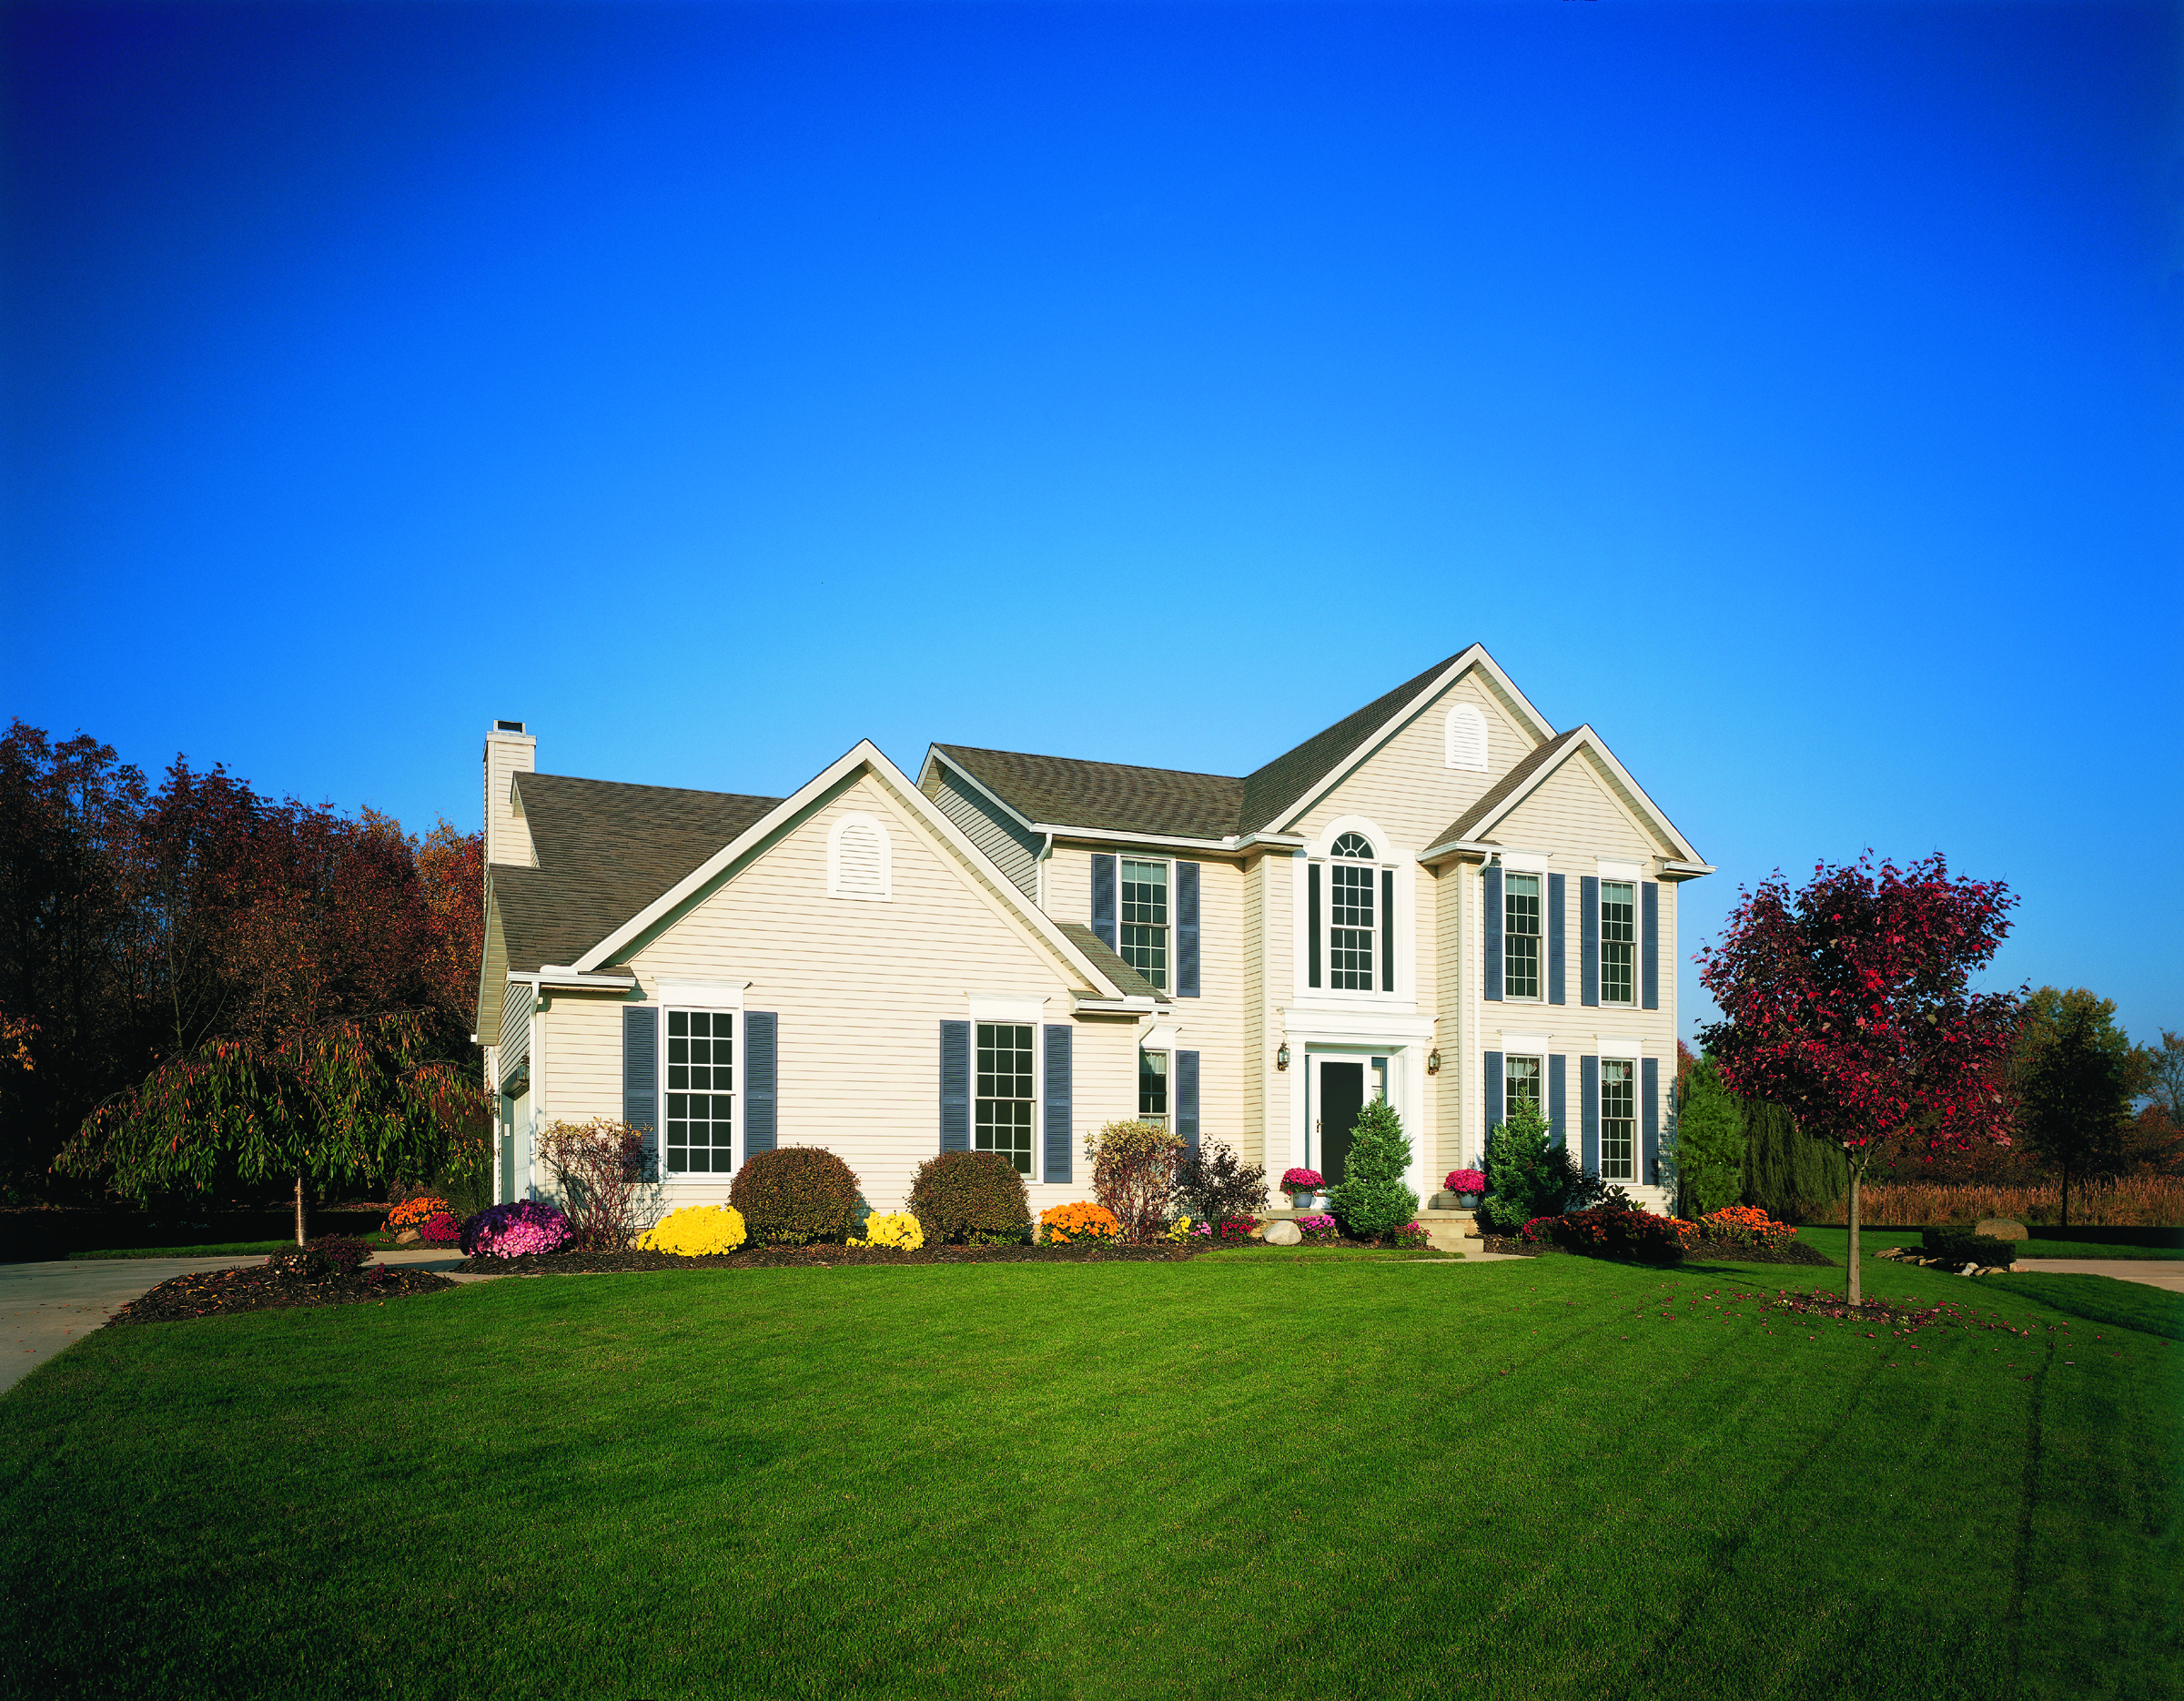 Give your home a good first impression by focusing on your exterior. It matters more than you think